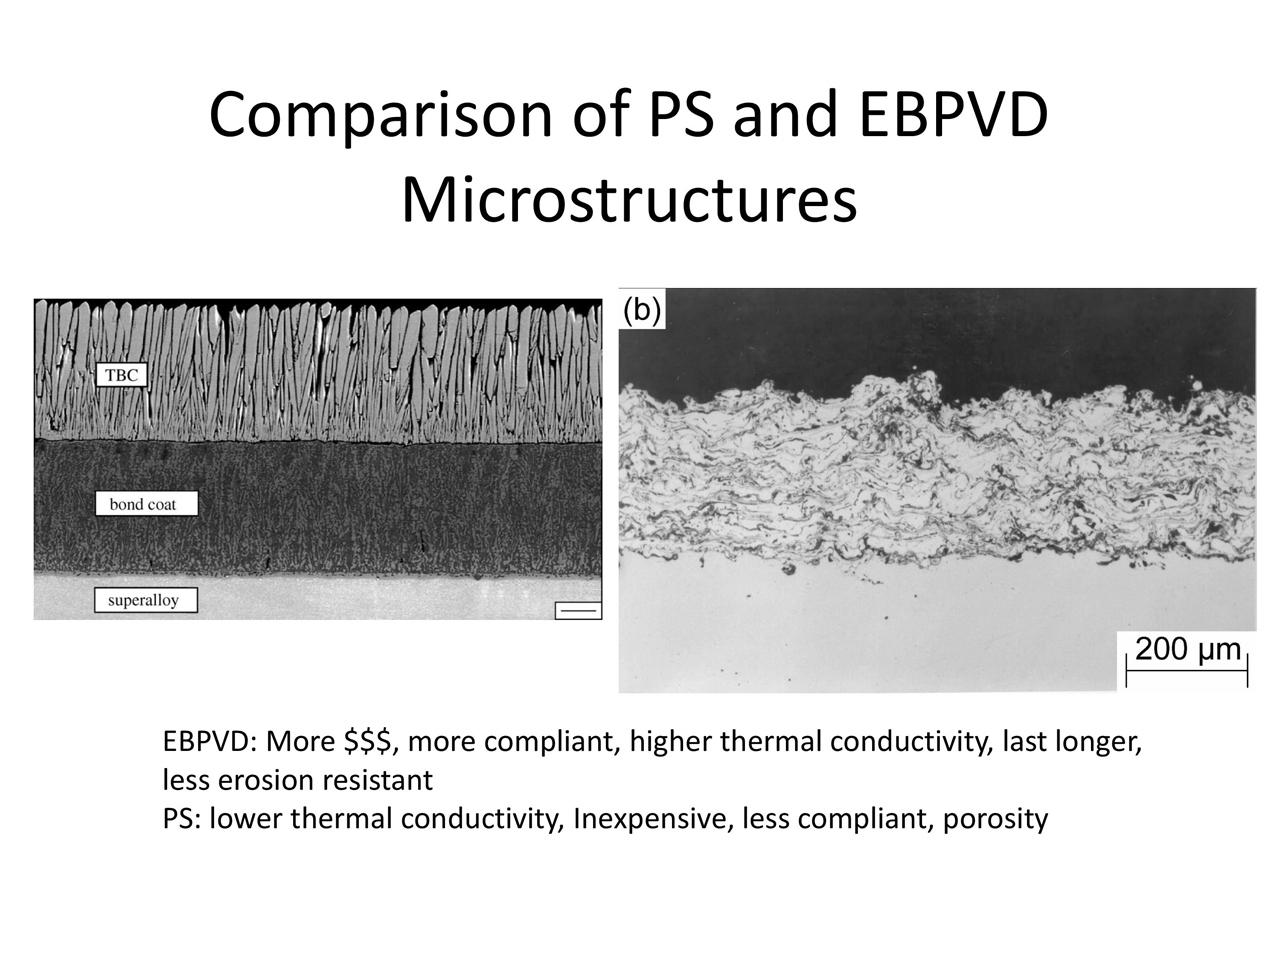 Comparison of PS and EBPVD Microstructures